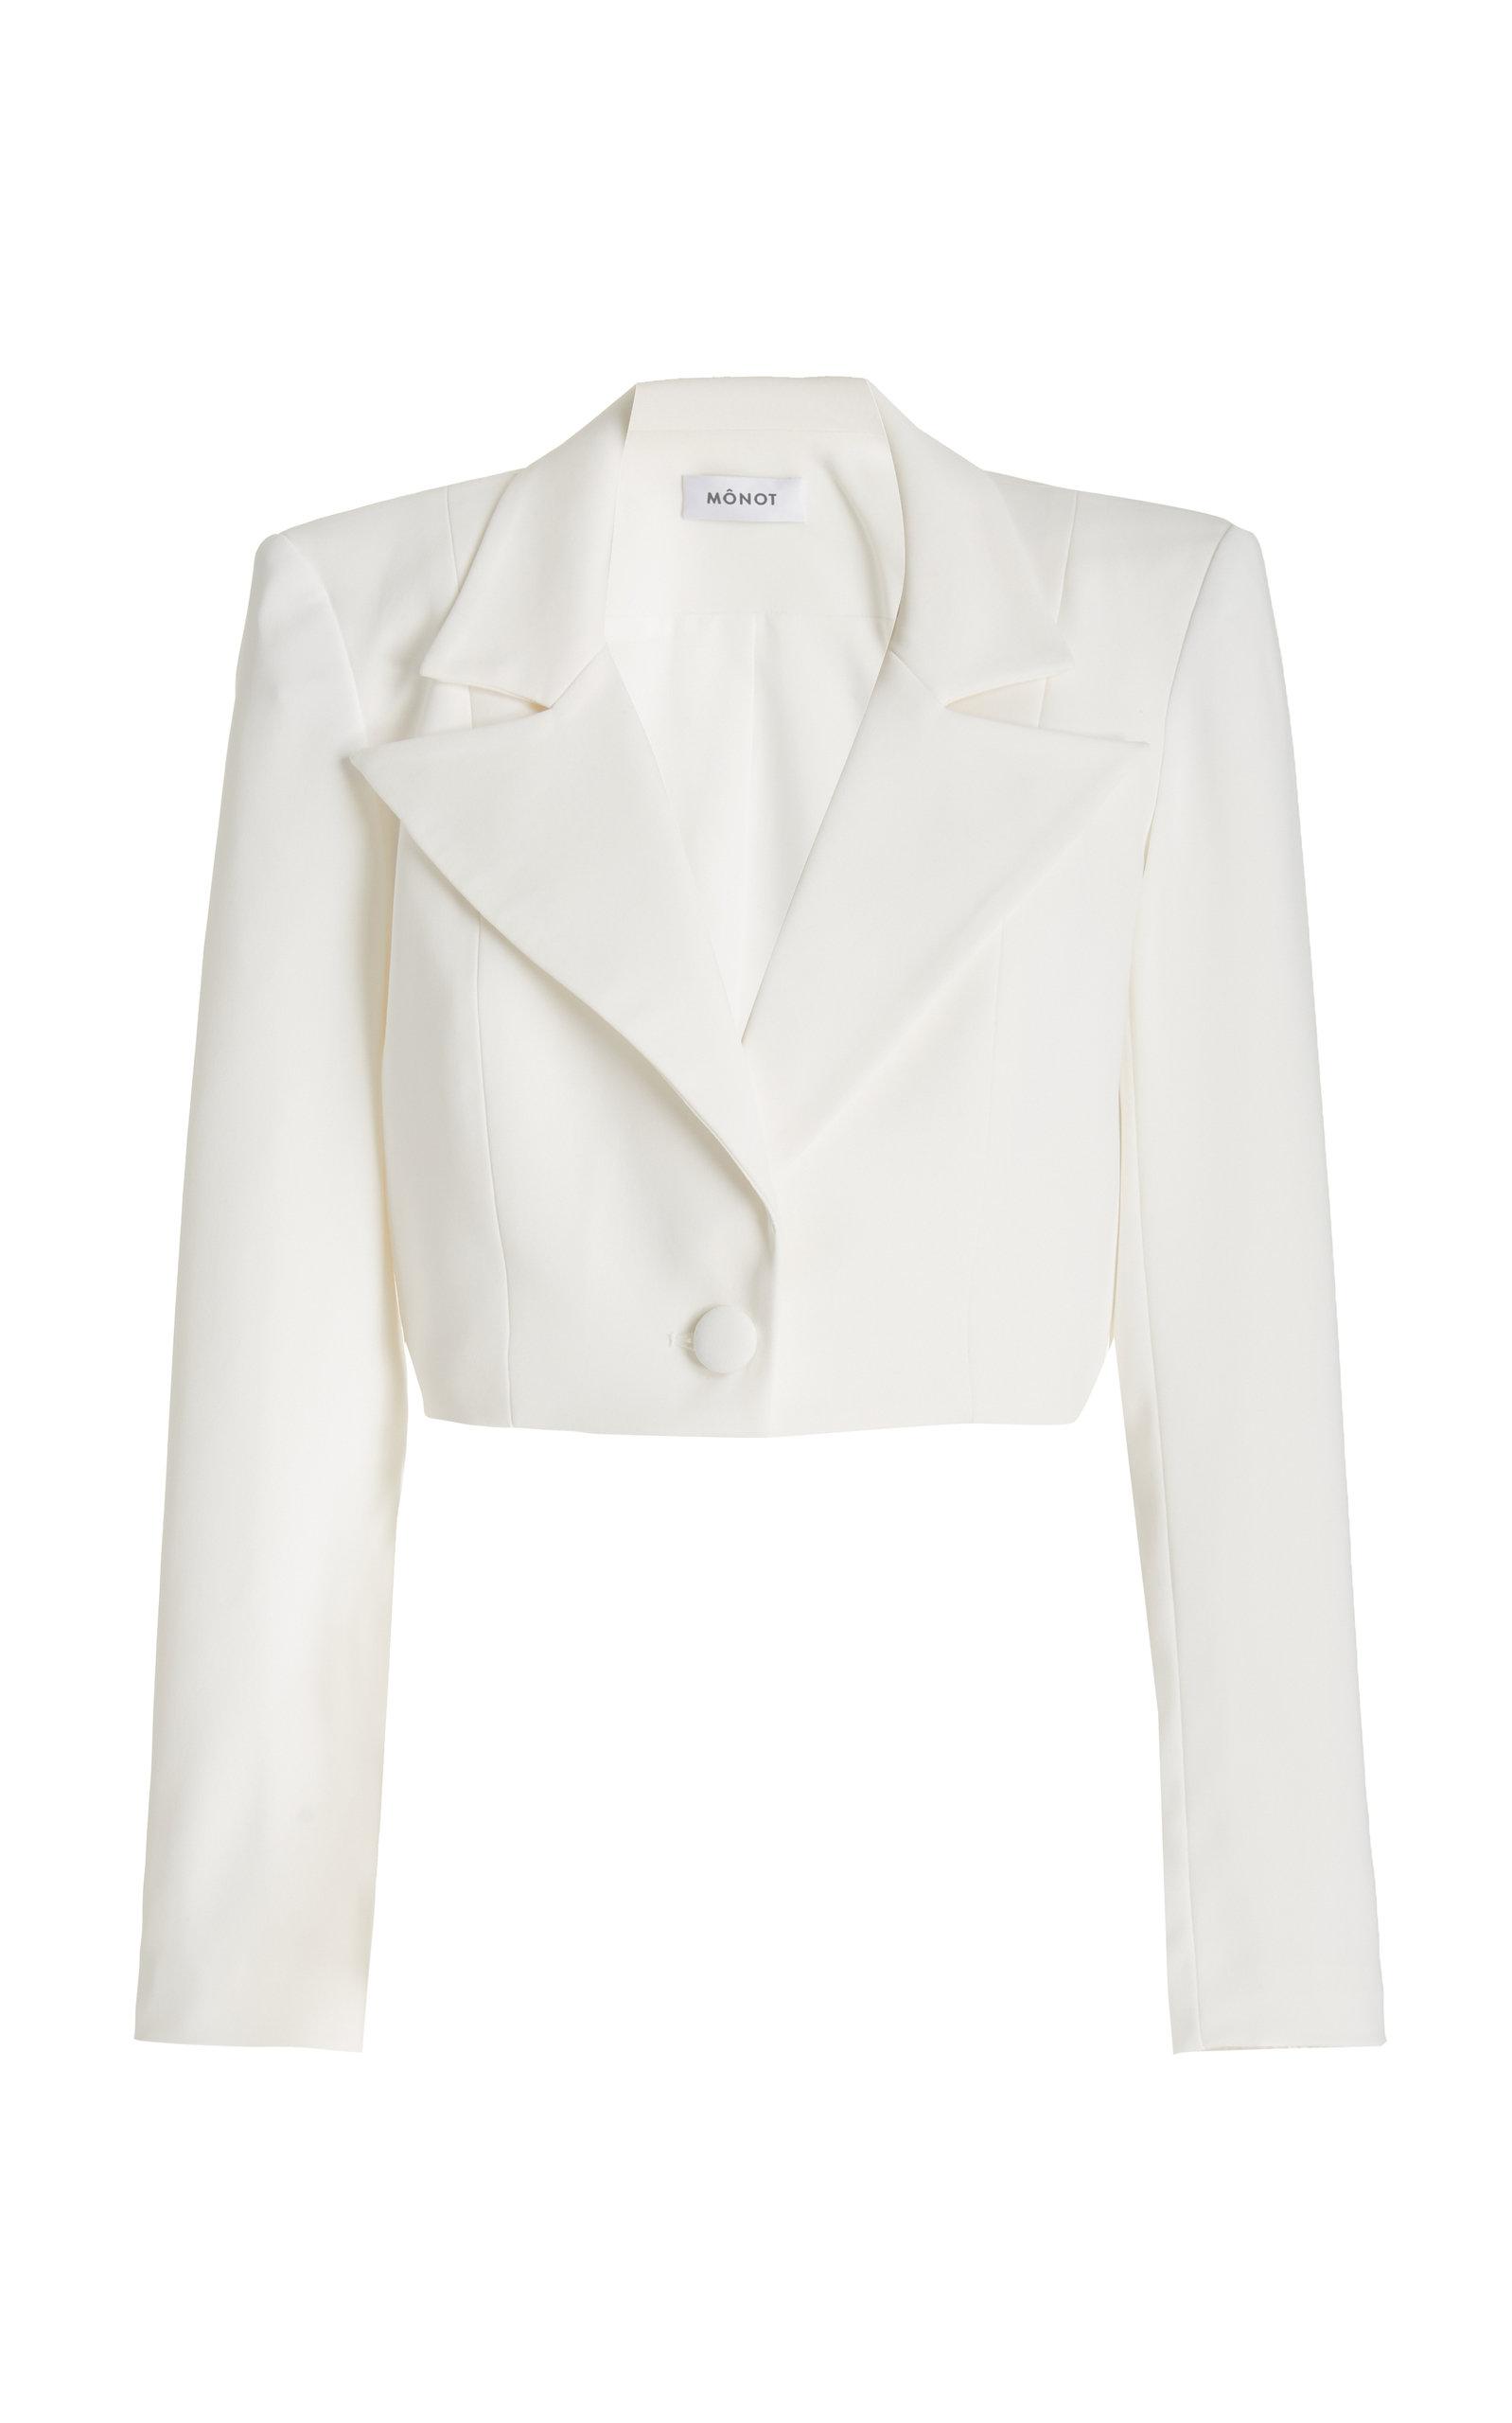 Monot Cropped Crepe Blazer in White | Lyst